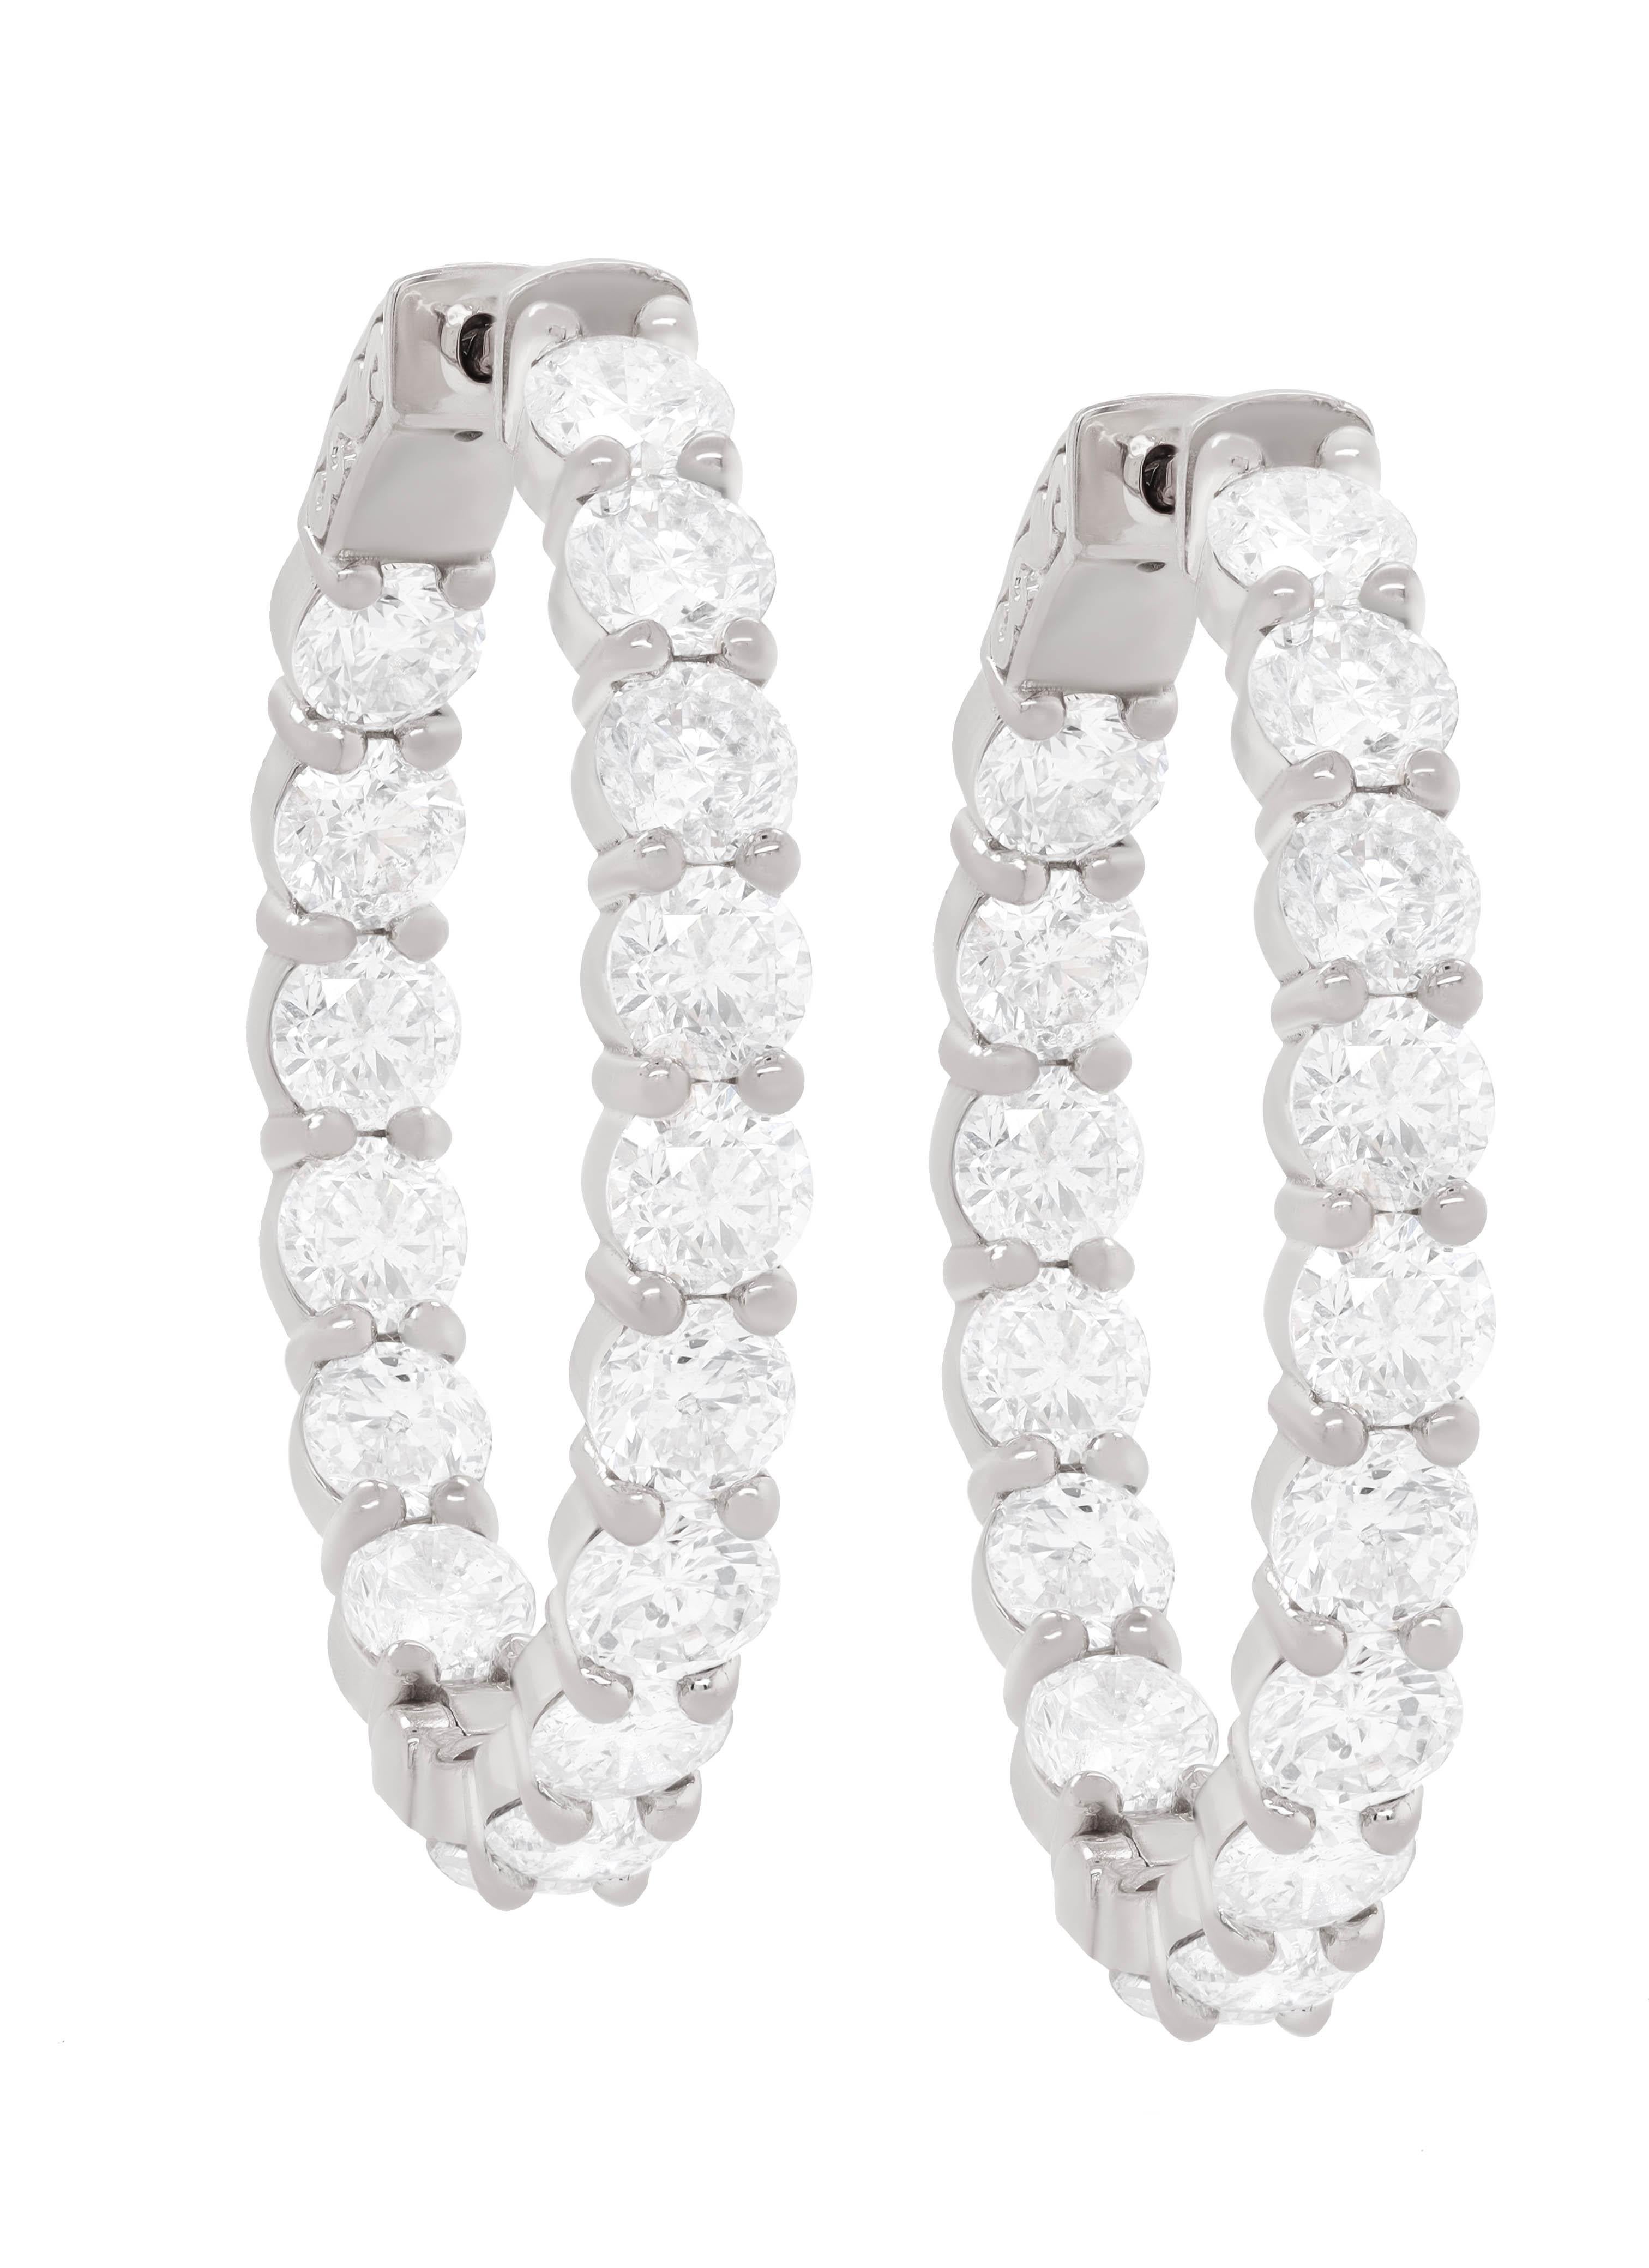 18 kt white gold inside-out oval shape hoop earrings adorned with 8.60 cts tw of round diamonds (32 stones)
Diana M. is a leading supplier of top-quality fine jewelry for over 35 years.
Diana M is one-stop shop for all your jewelry shopping,